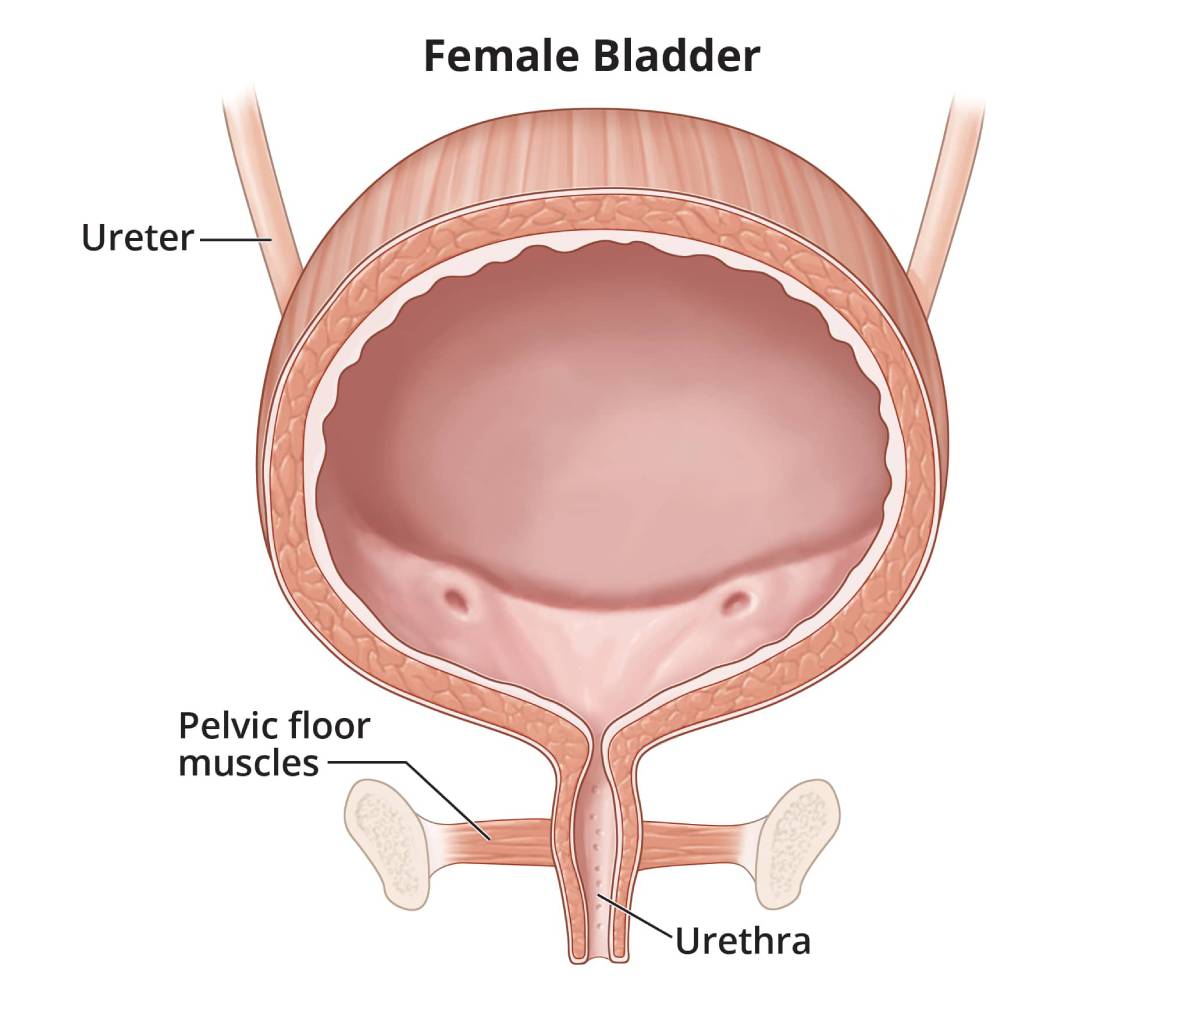 Bladder Control Problems: How to Improve and Maintain Bladder